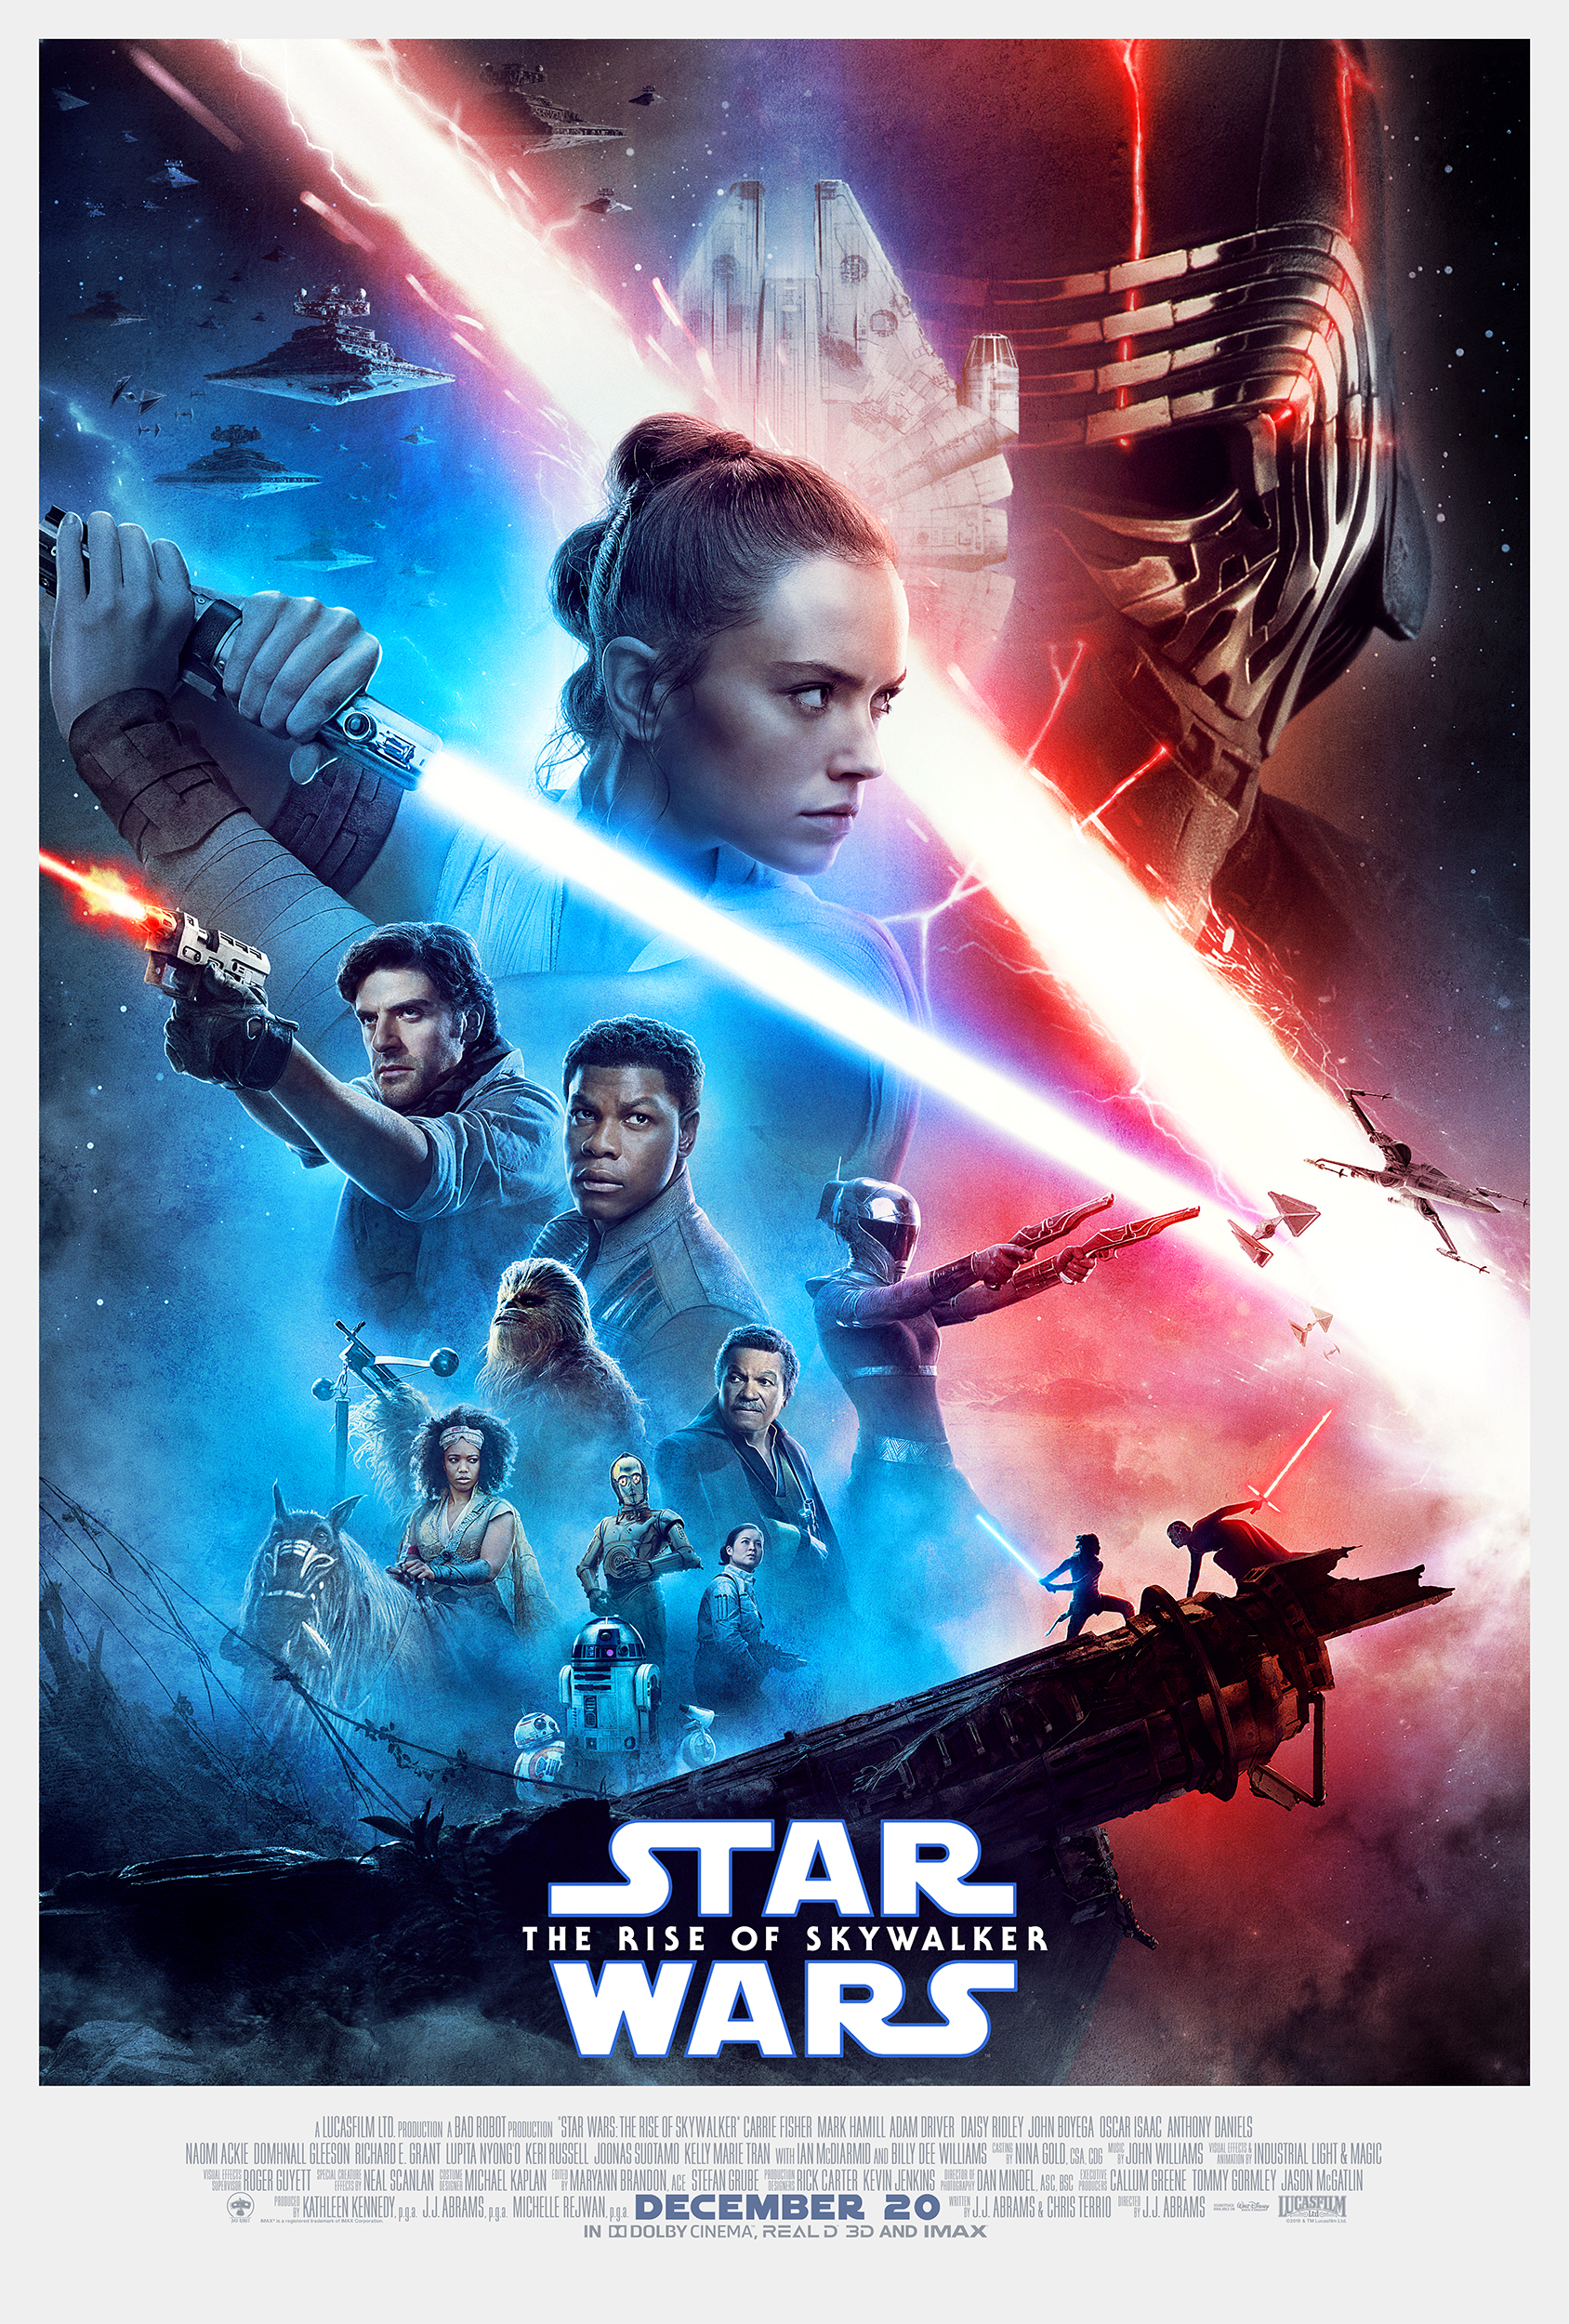 The Last Jedi Poster Star Wars Teaser Coming New Dec 17 FREE P+P CHOOSE UR SIZE 